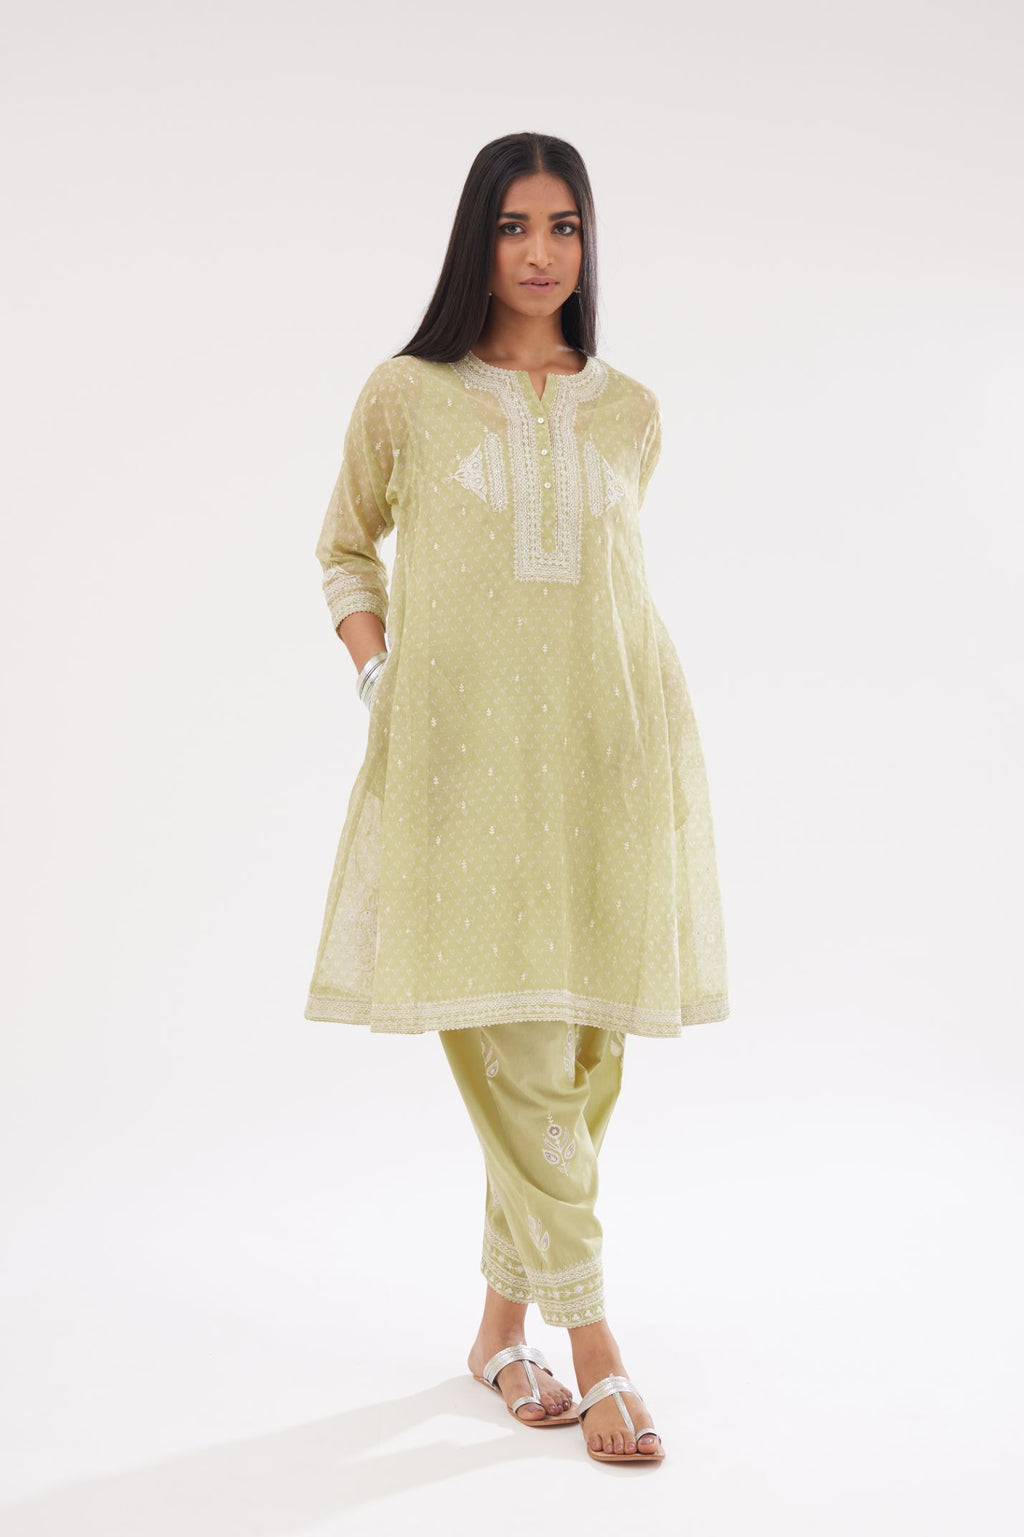 Green cotton chanderi hand block printed short kalidar phiran style kurta set with button placket neckline and dori and silk thraed embroidery all over.